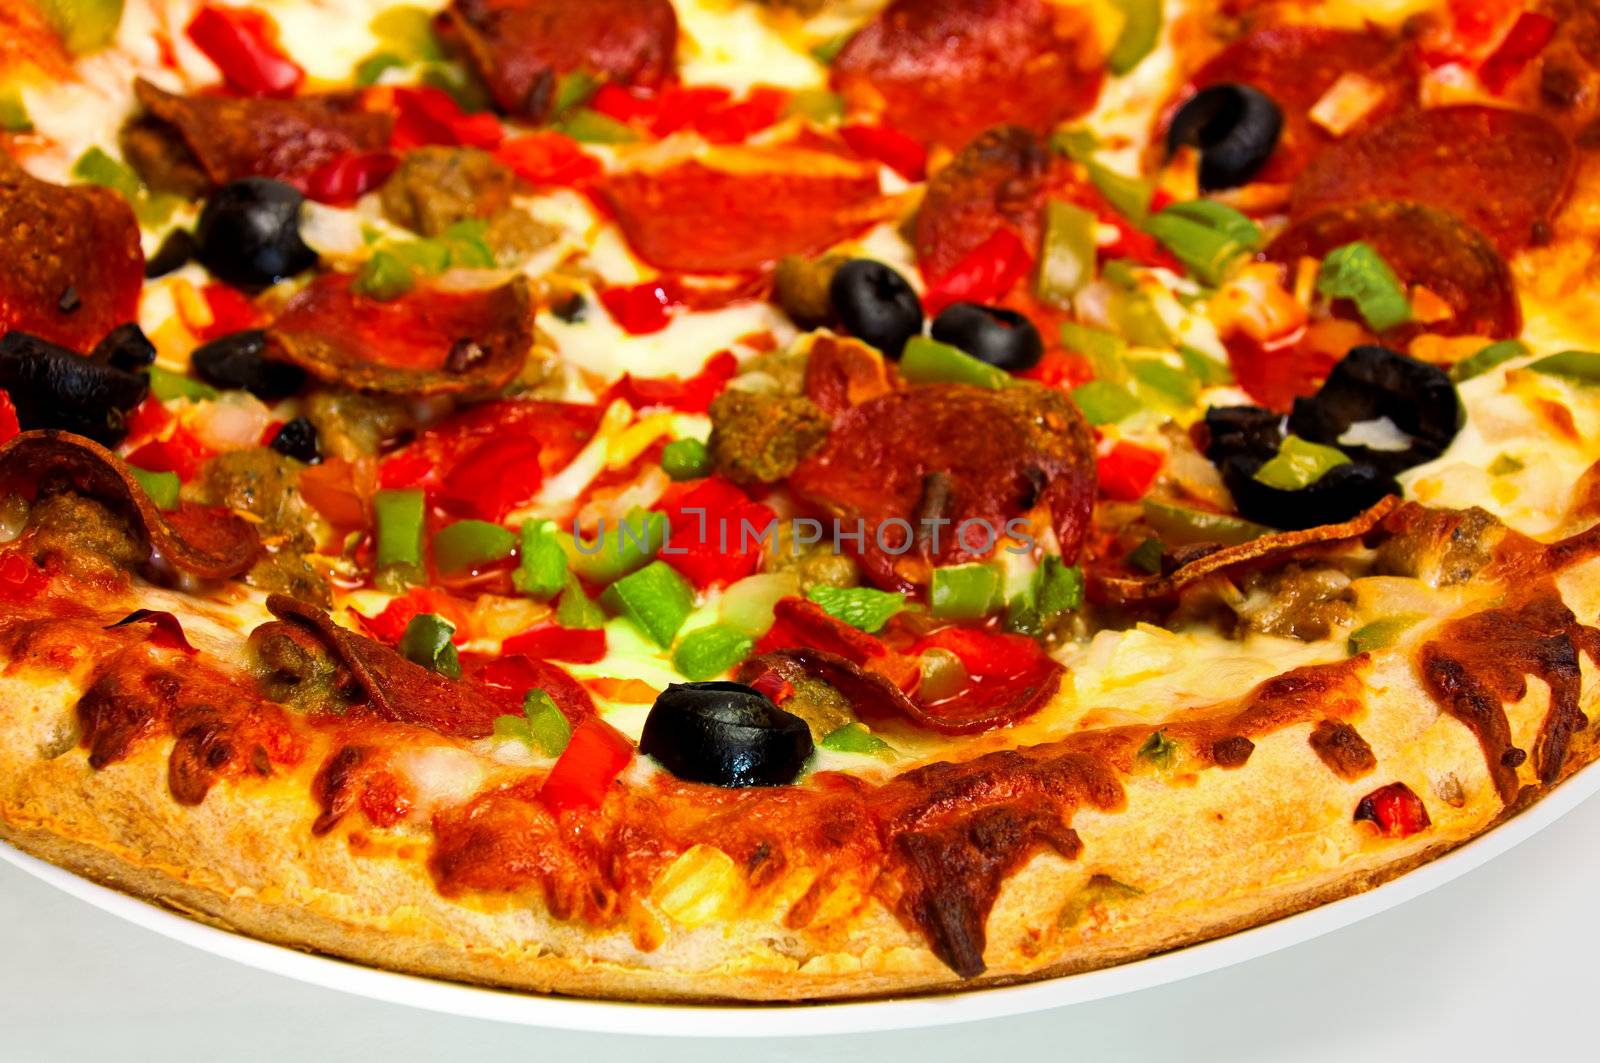 Supreme Pizza with tomato, cheese, pepperoni, black olives, green and red peppers.